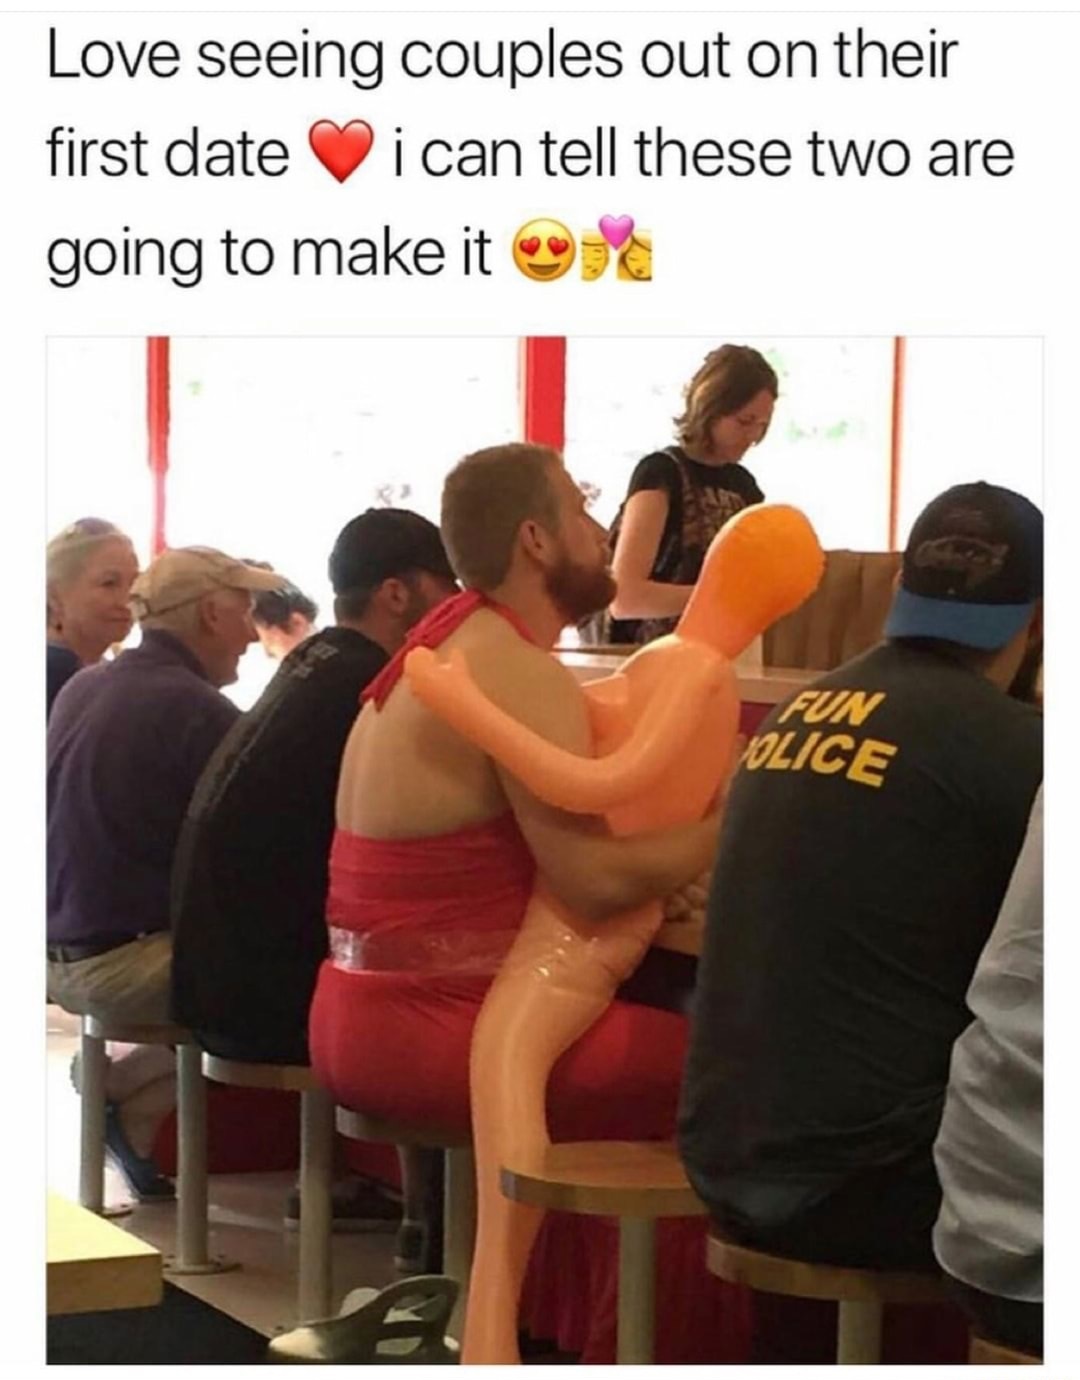 funny random adult meme - Love seeing couples out on their first date i can tell these two are going to make it Gun Olice